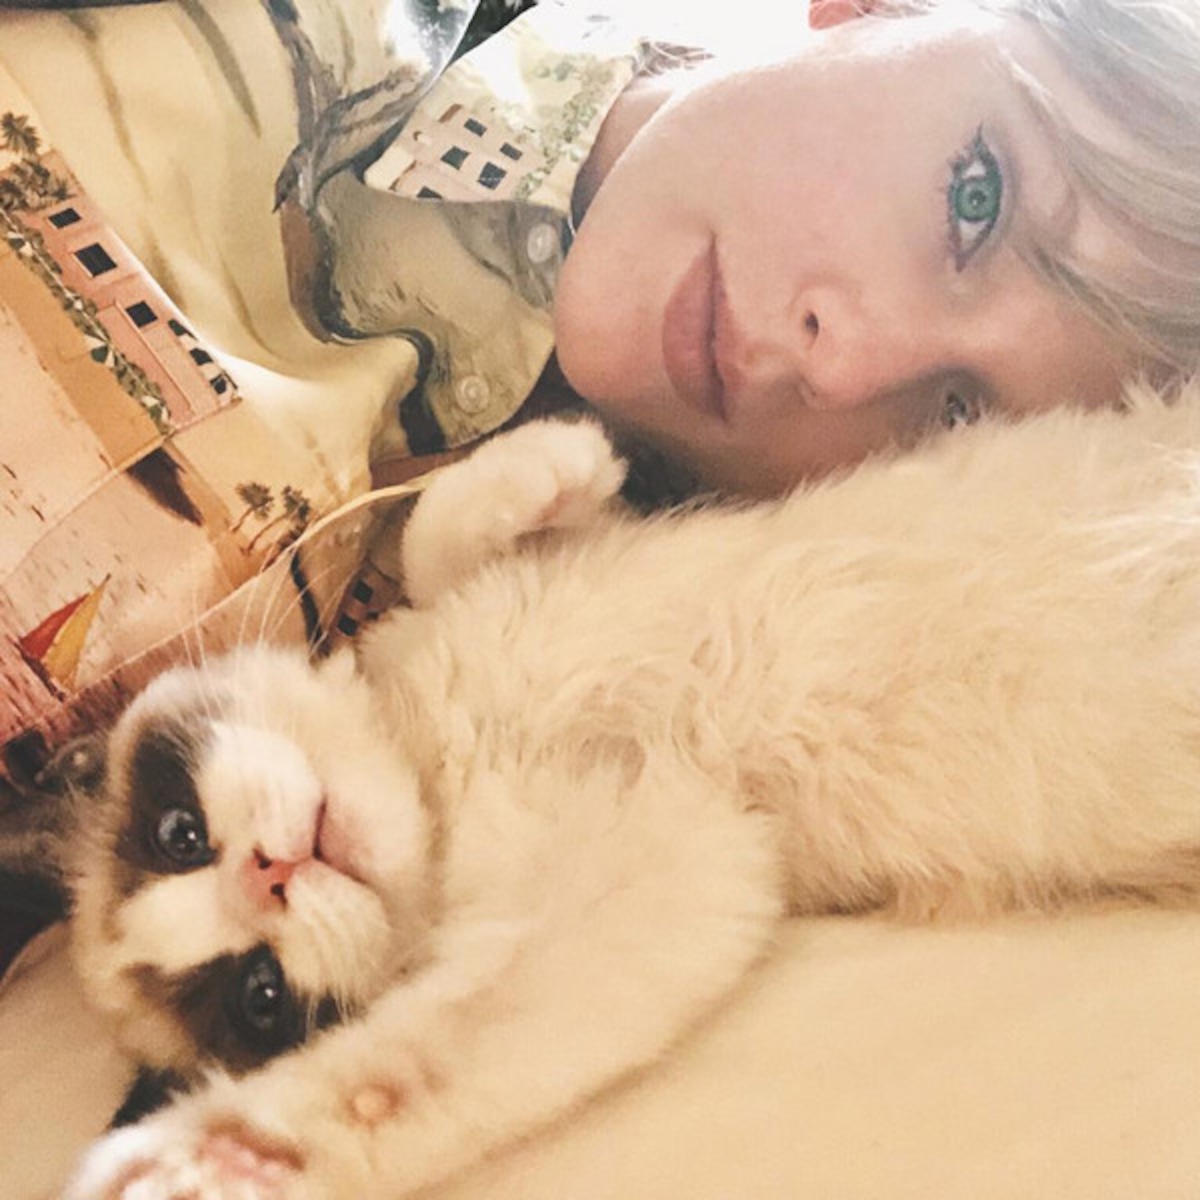 Taylor Swift Cradles Cat Benjamin Button in Adorable New Picture - E! Online